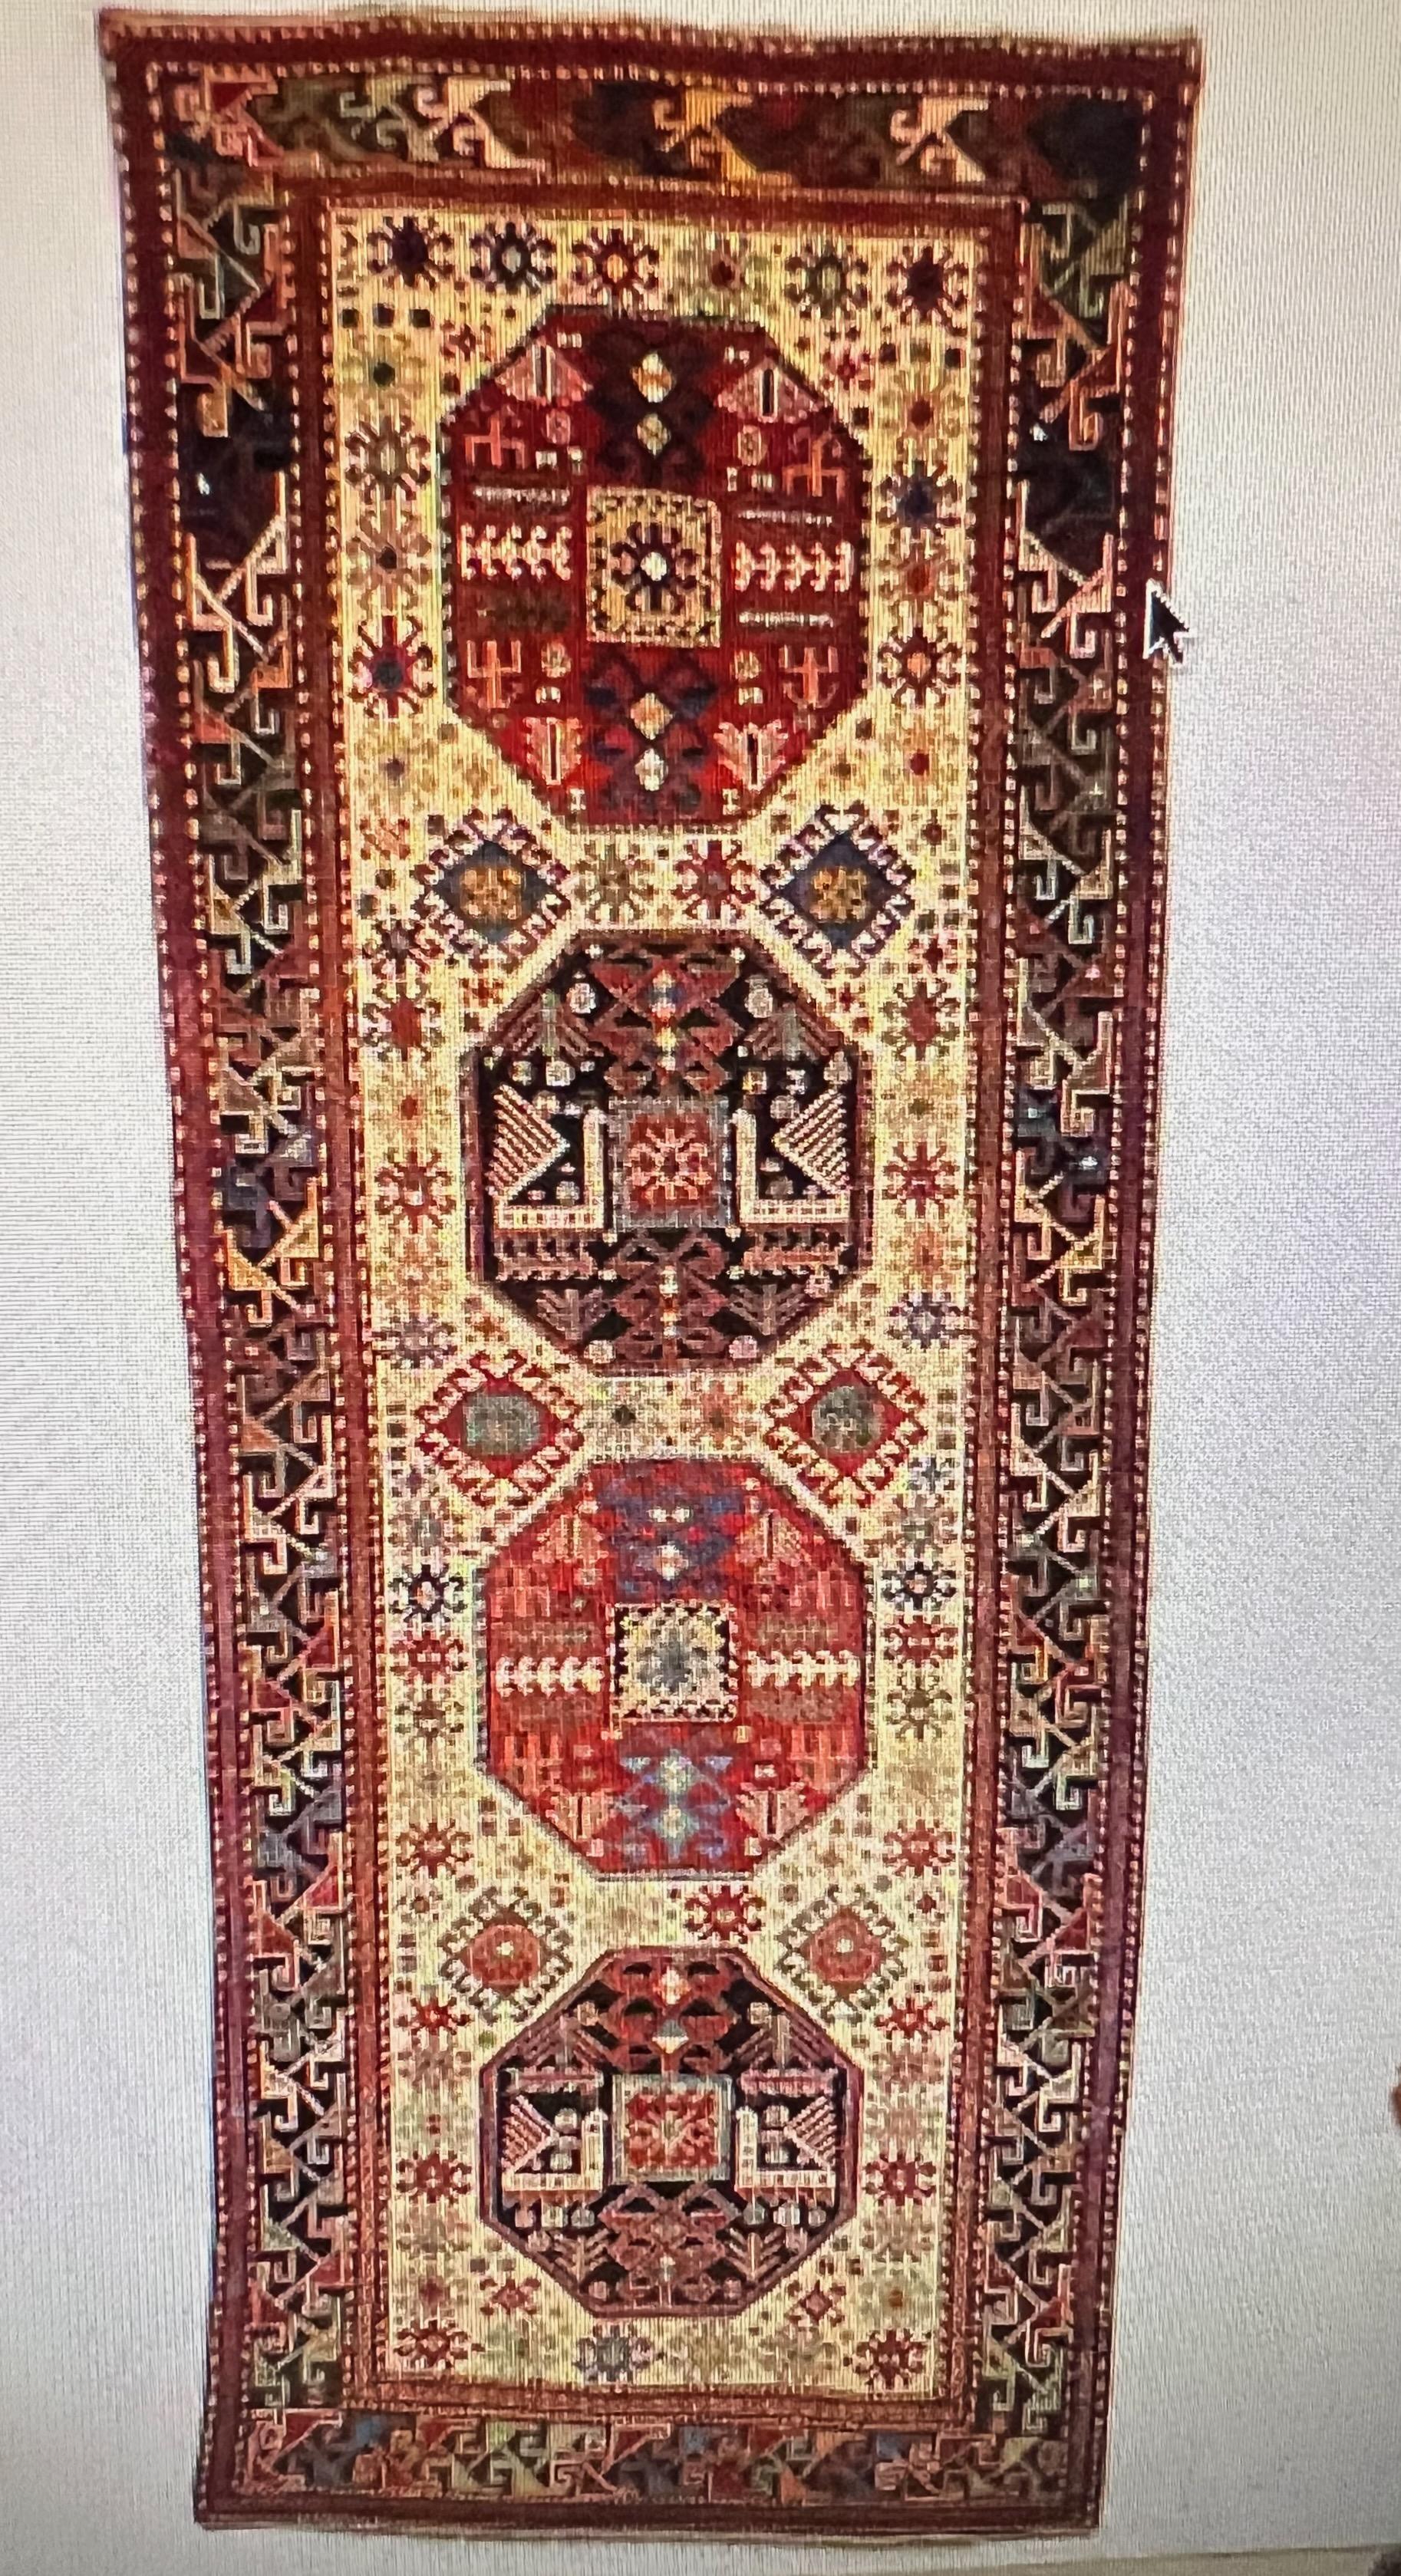 19th Century Akstafa runner dated 1876.
All natural dyes, beautifully oxidized dark brown, good colors.
Antique Caucasian rugs from the Shirvan district village of Akstafa are among the rarest types of rugs from that region. 
In excellent condition.